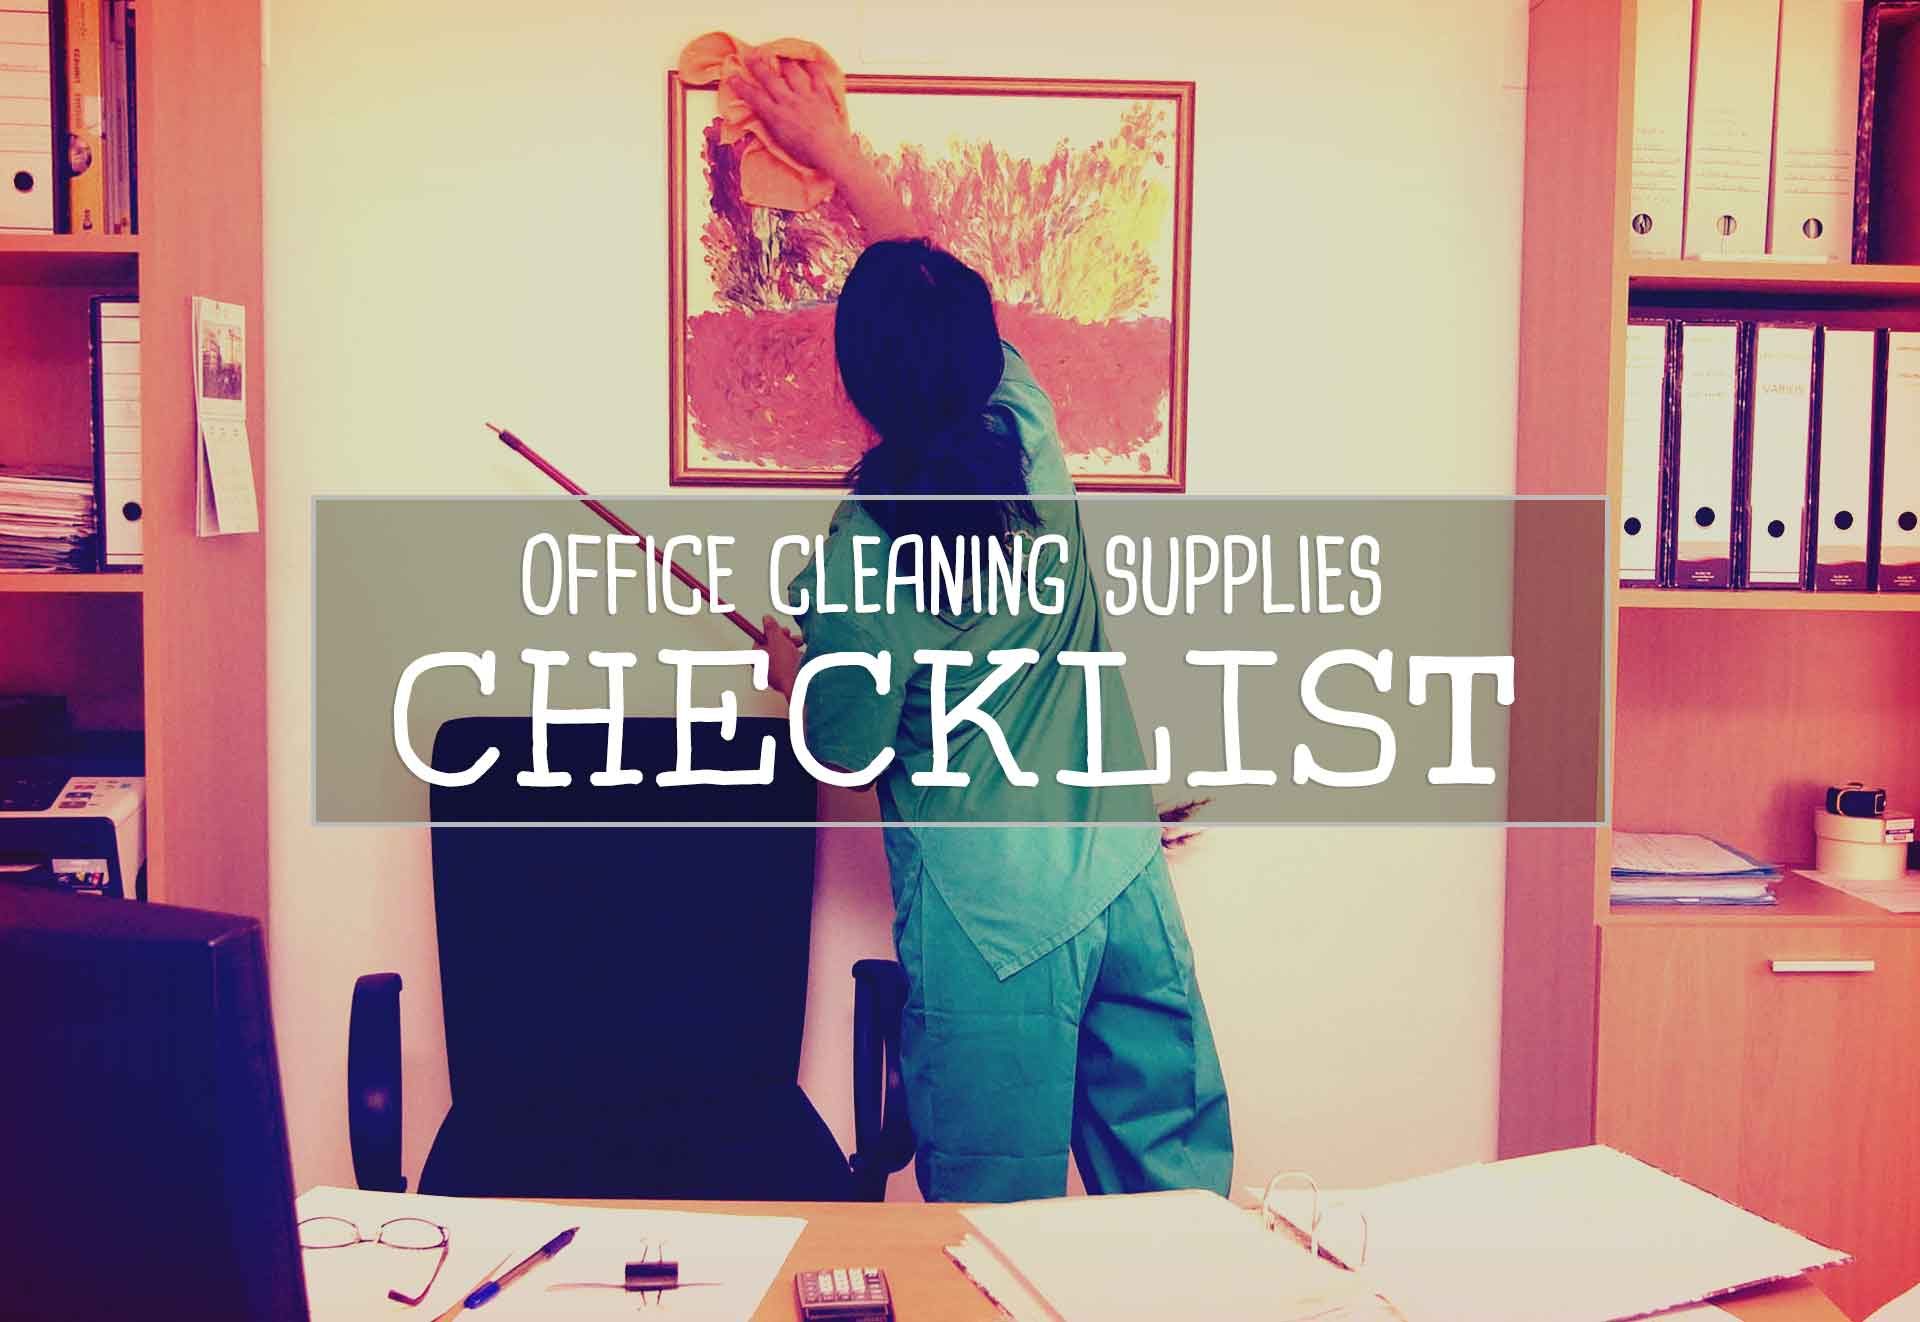 https://www.hbpc.com/wp-content/uploads/bfi_thumb/office-cleaning-supply-checklist-37xdwspgryt459f1ogwu0w.jpg